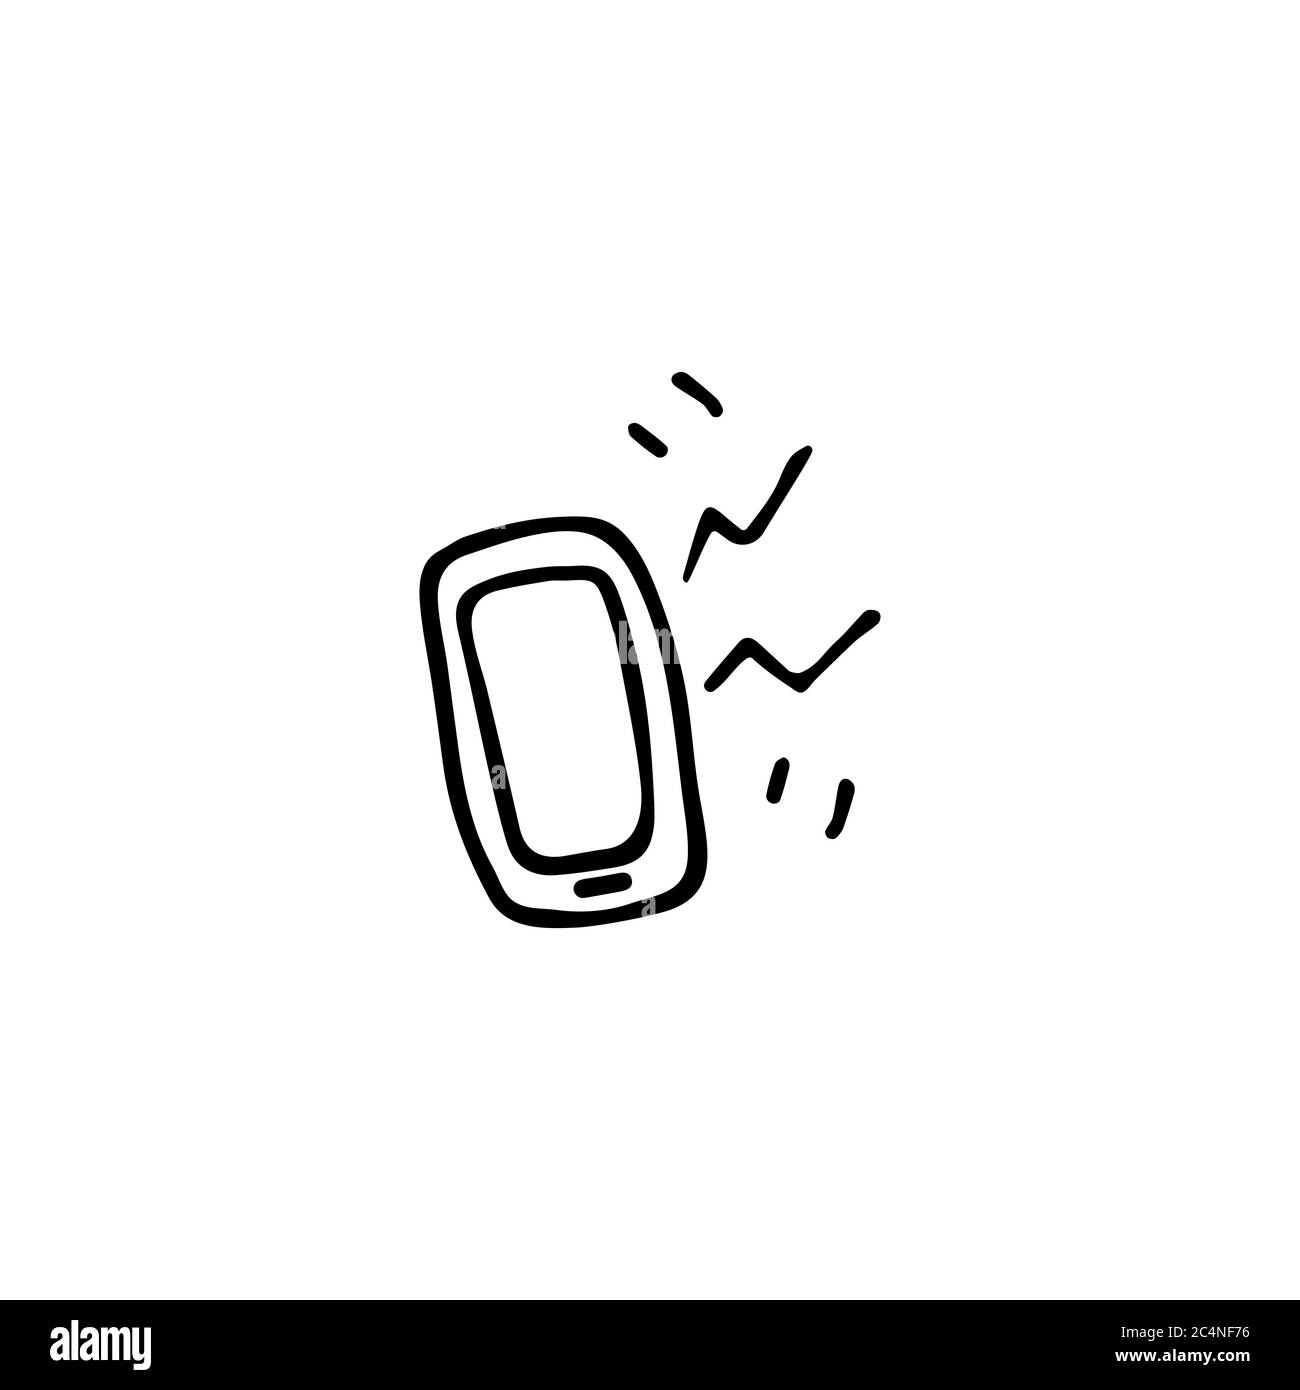 Ringing mobile phone. Vector sketch illustration - smartphone with touchscreen display. Stock Vector